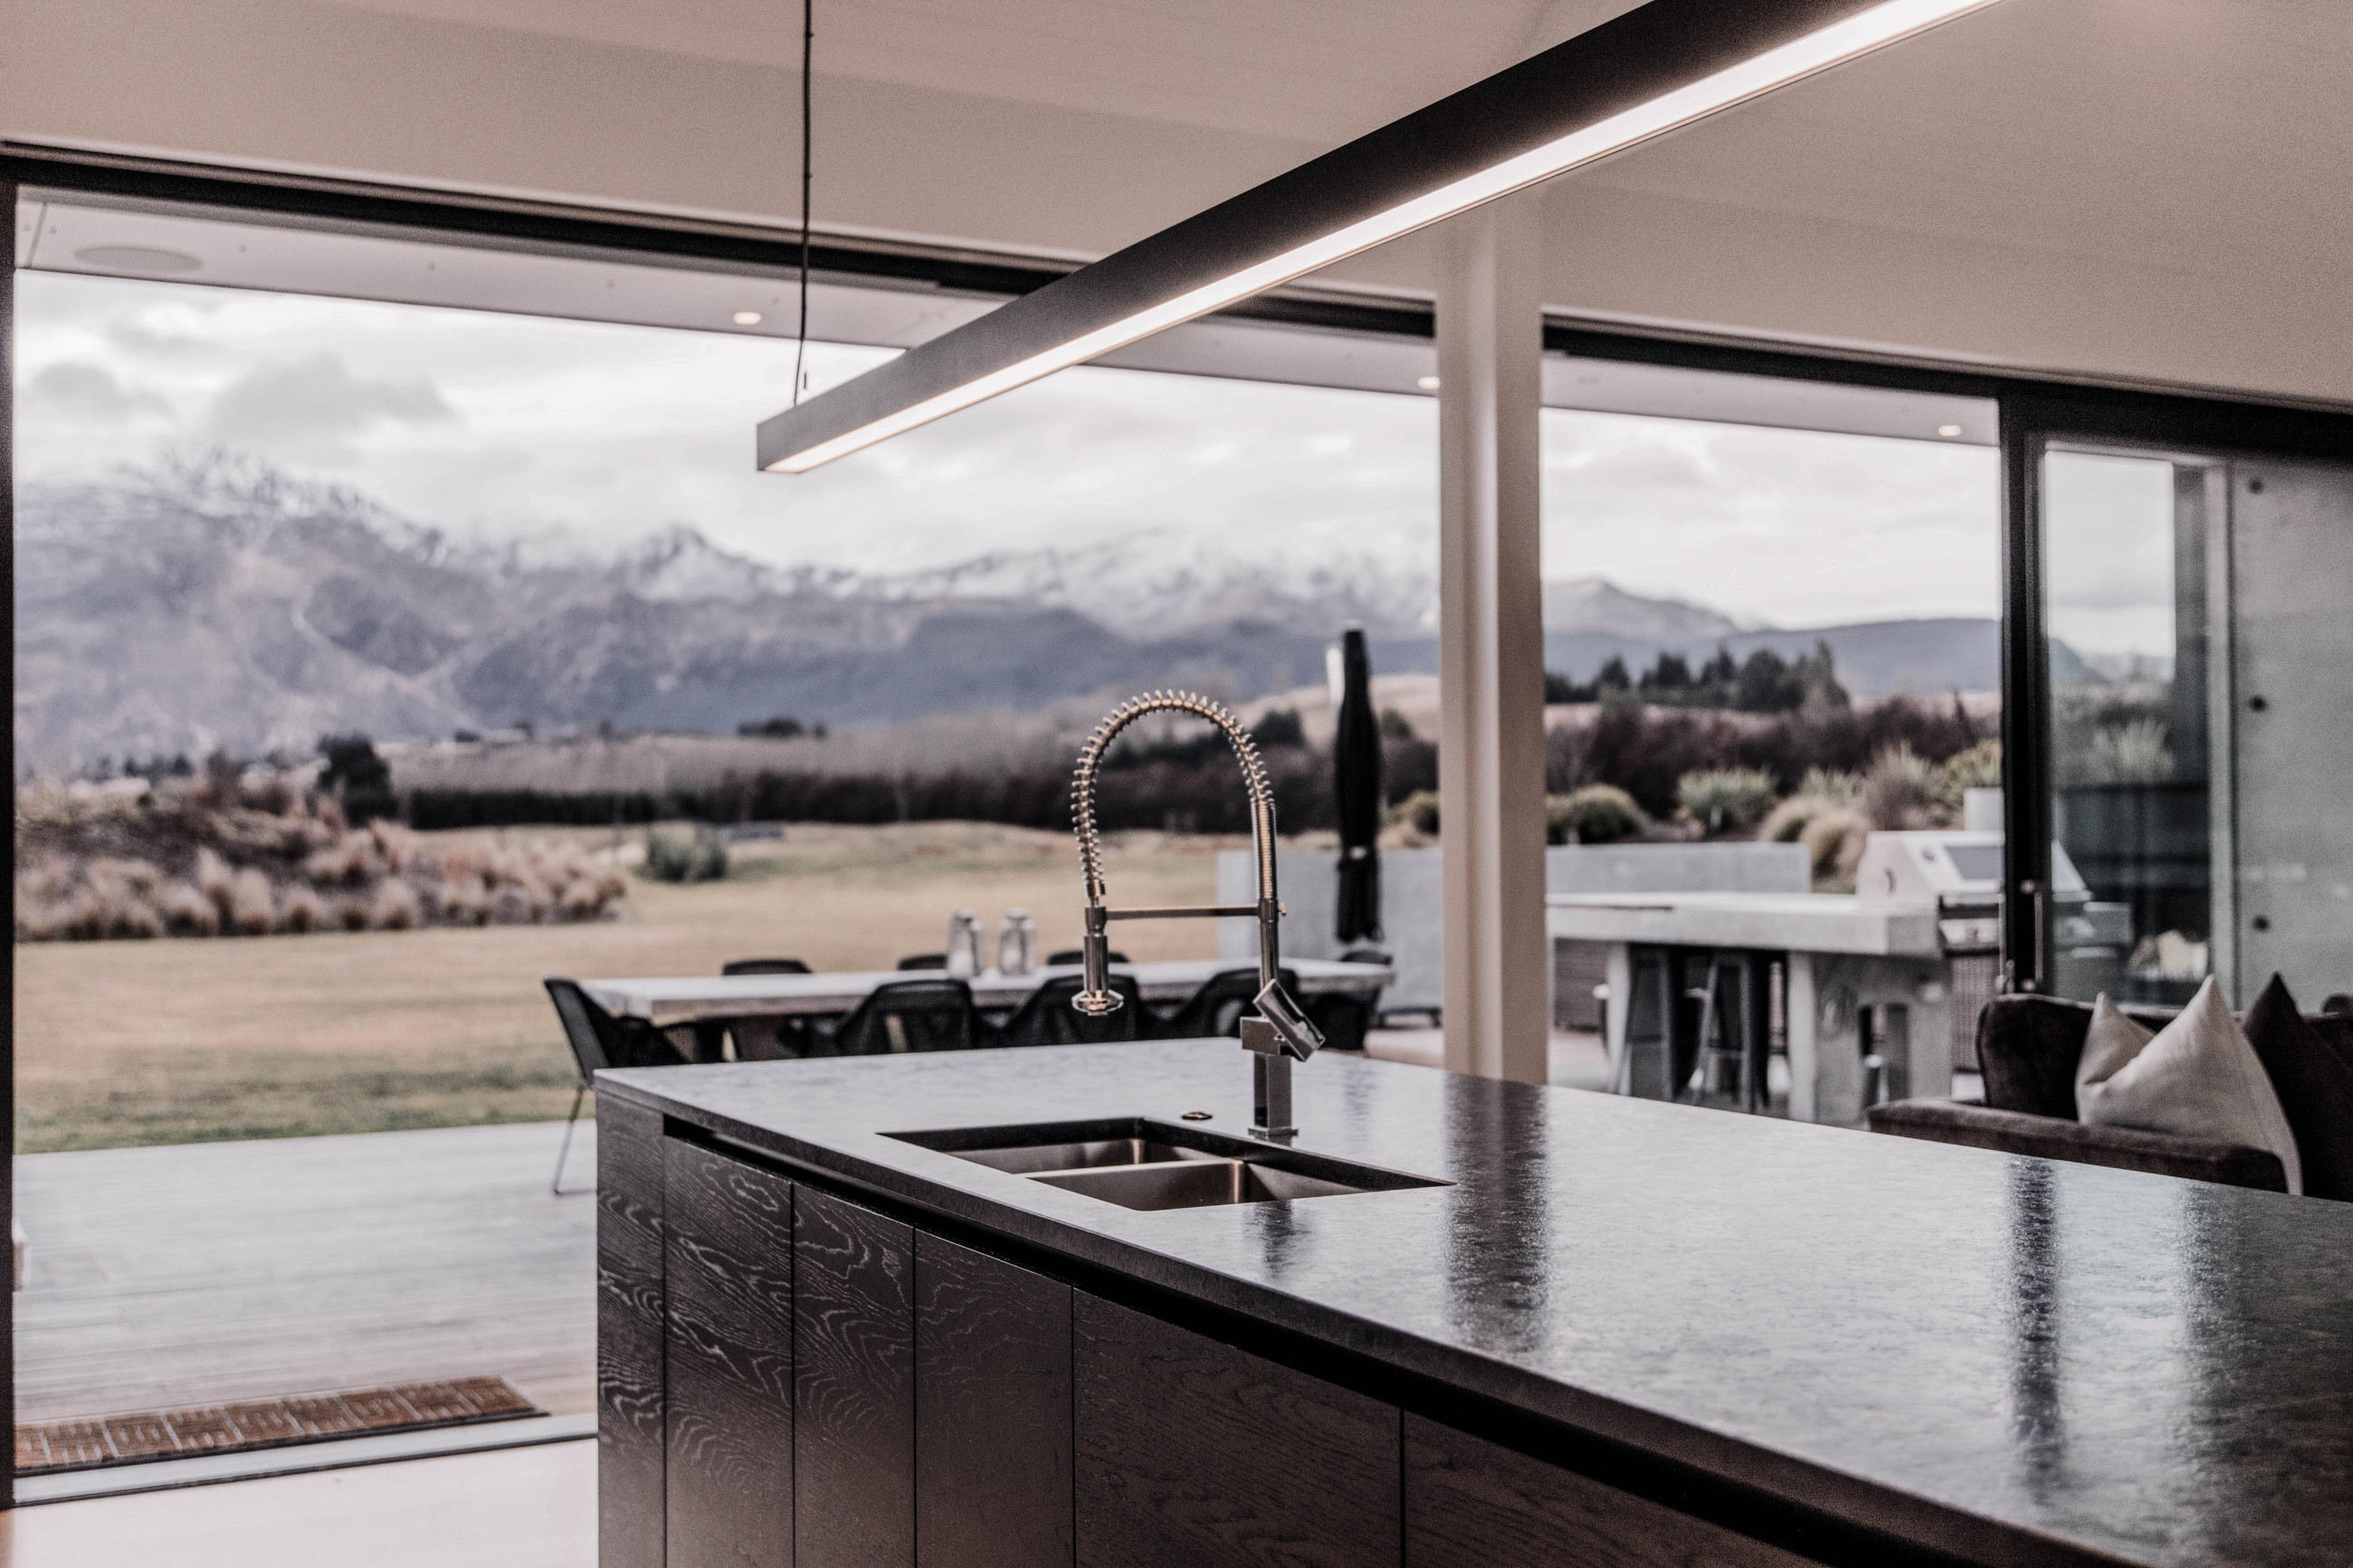 Elegant modern kitchen, with vast windows and doors offering views of distant mountains